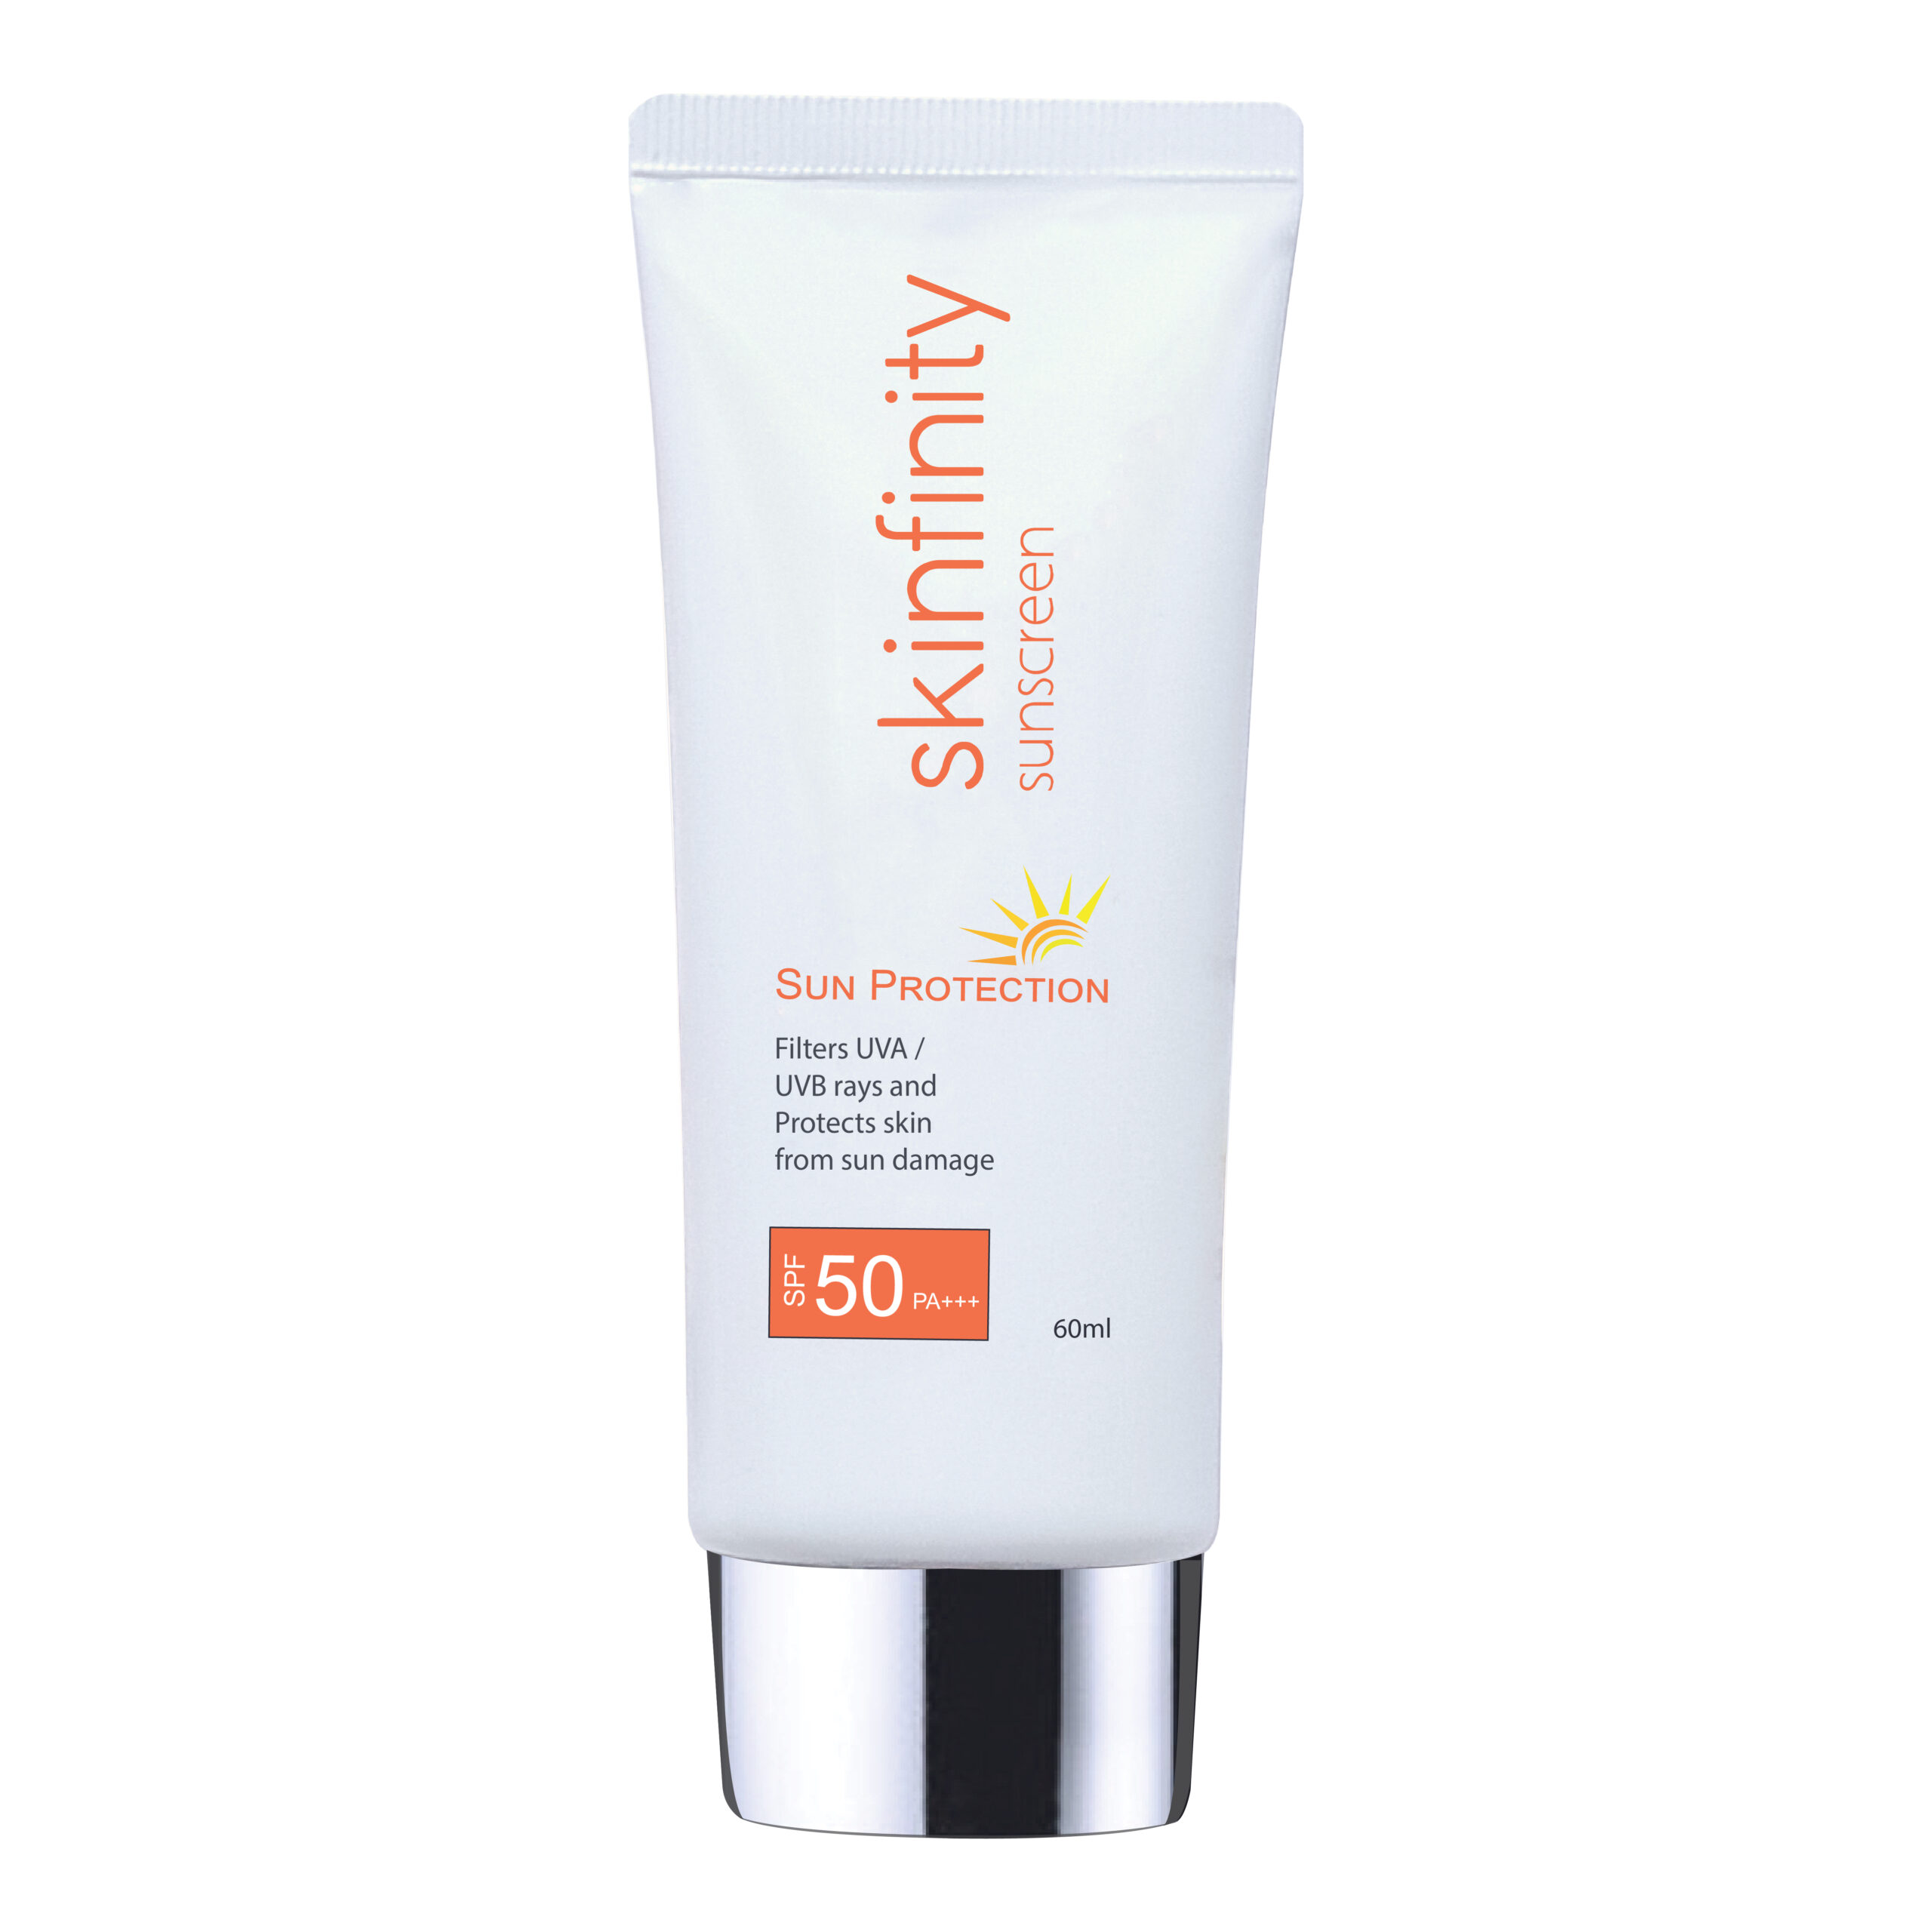 Featured image for “SKINFINITY SUNSCREEN SPF 50PA++”